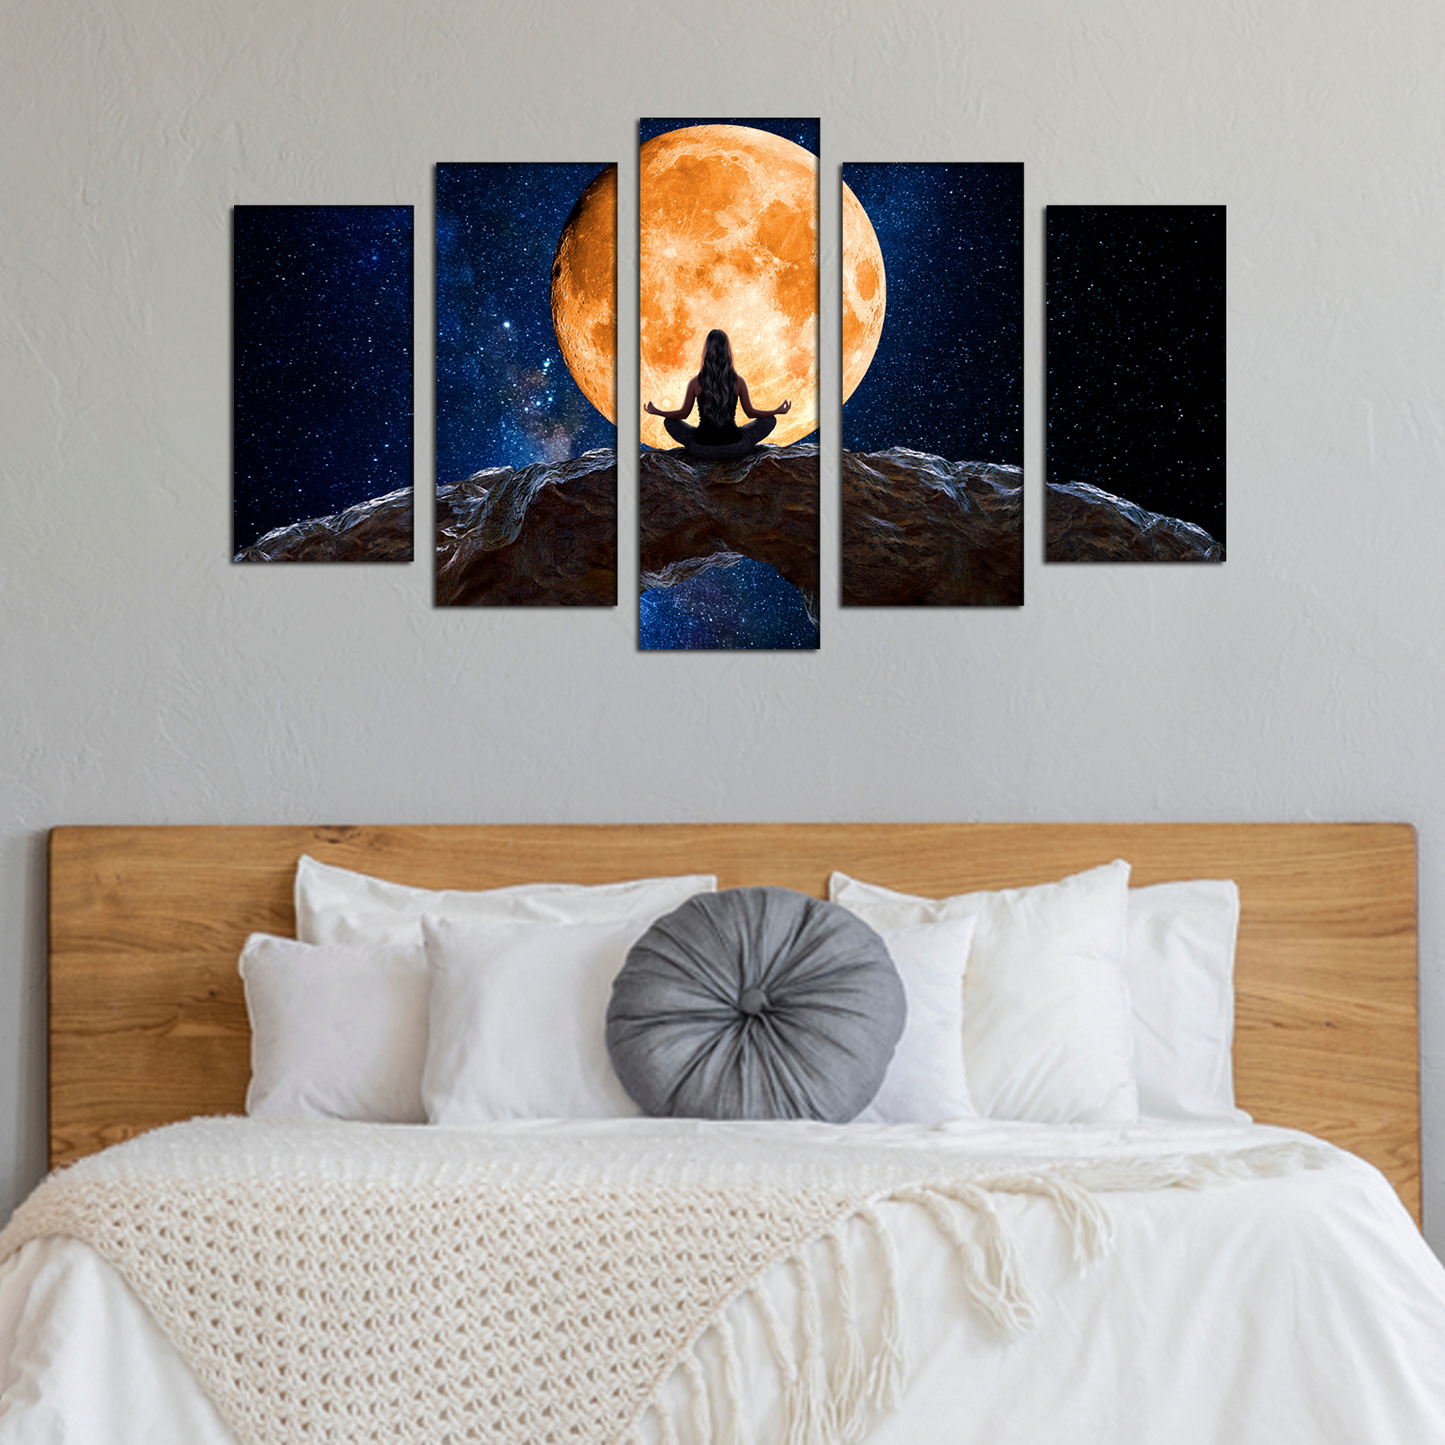 Women meditating and observing the moon MDF wall panel painting